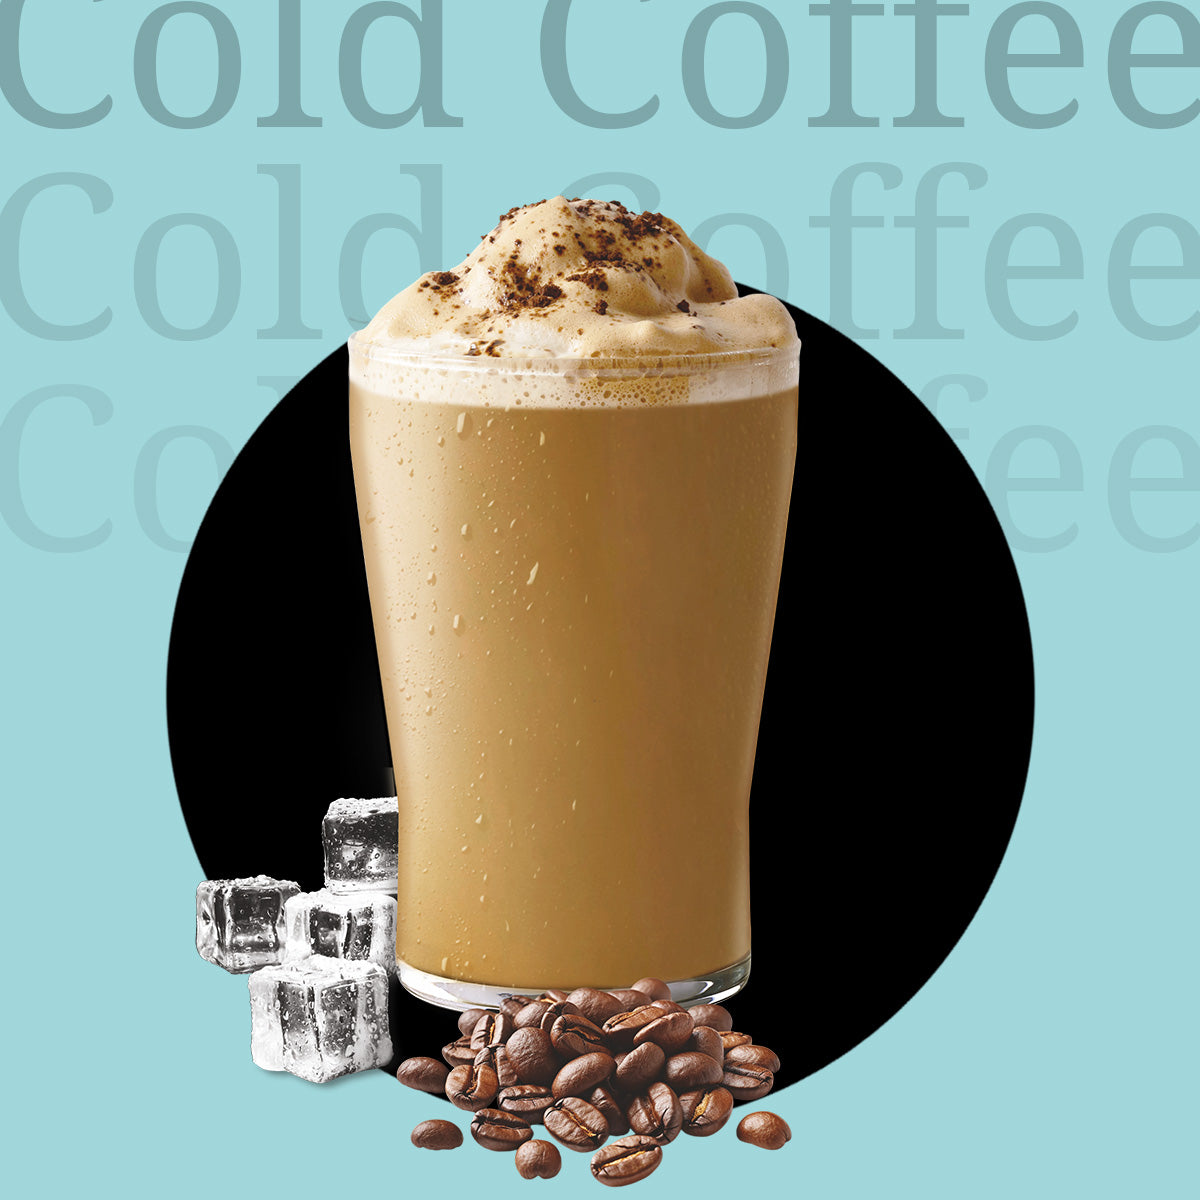 COLD COFFEE Ready-to-make Cold Beverage Kit